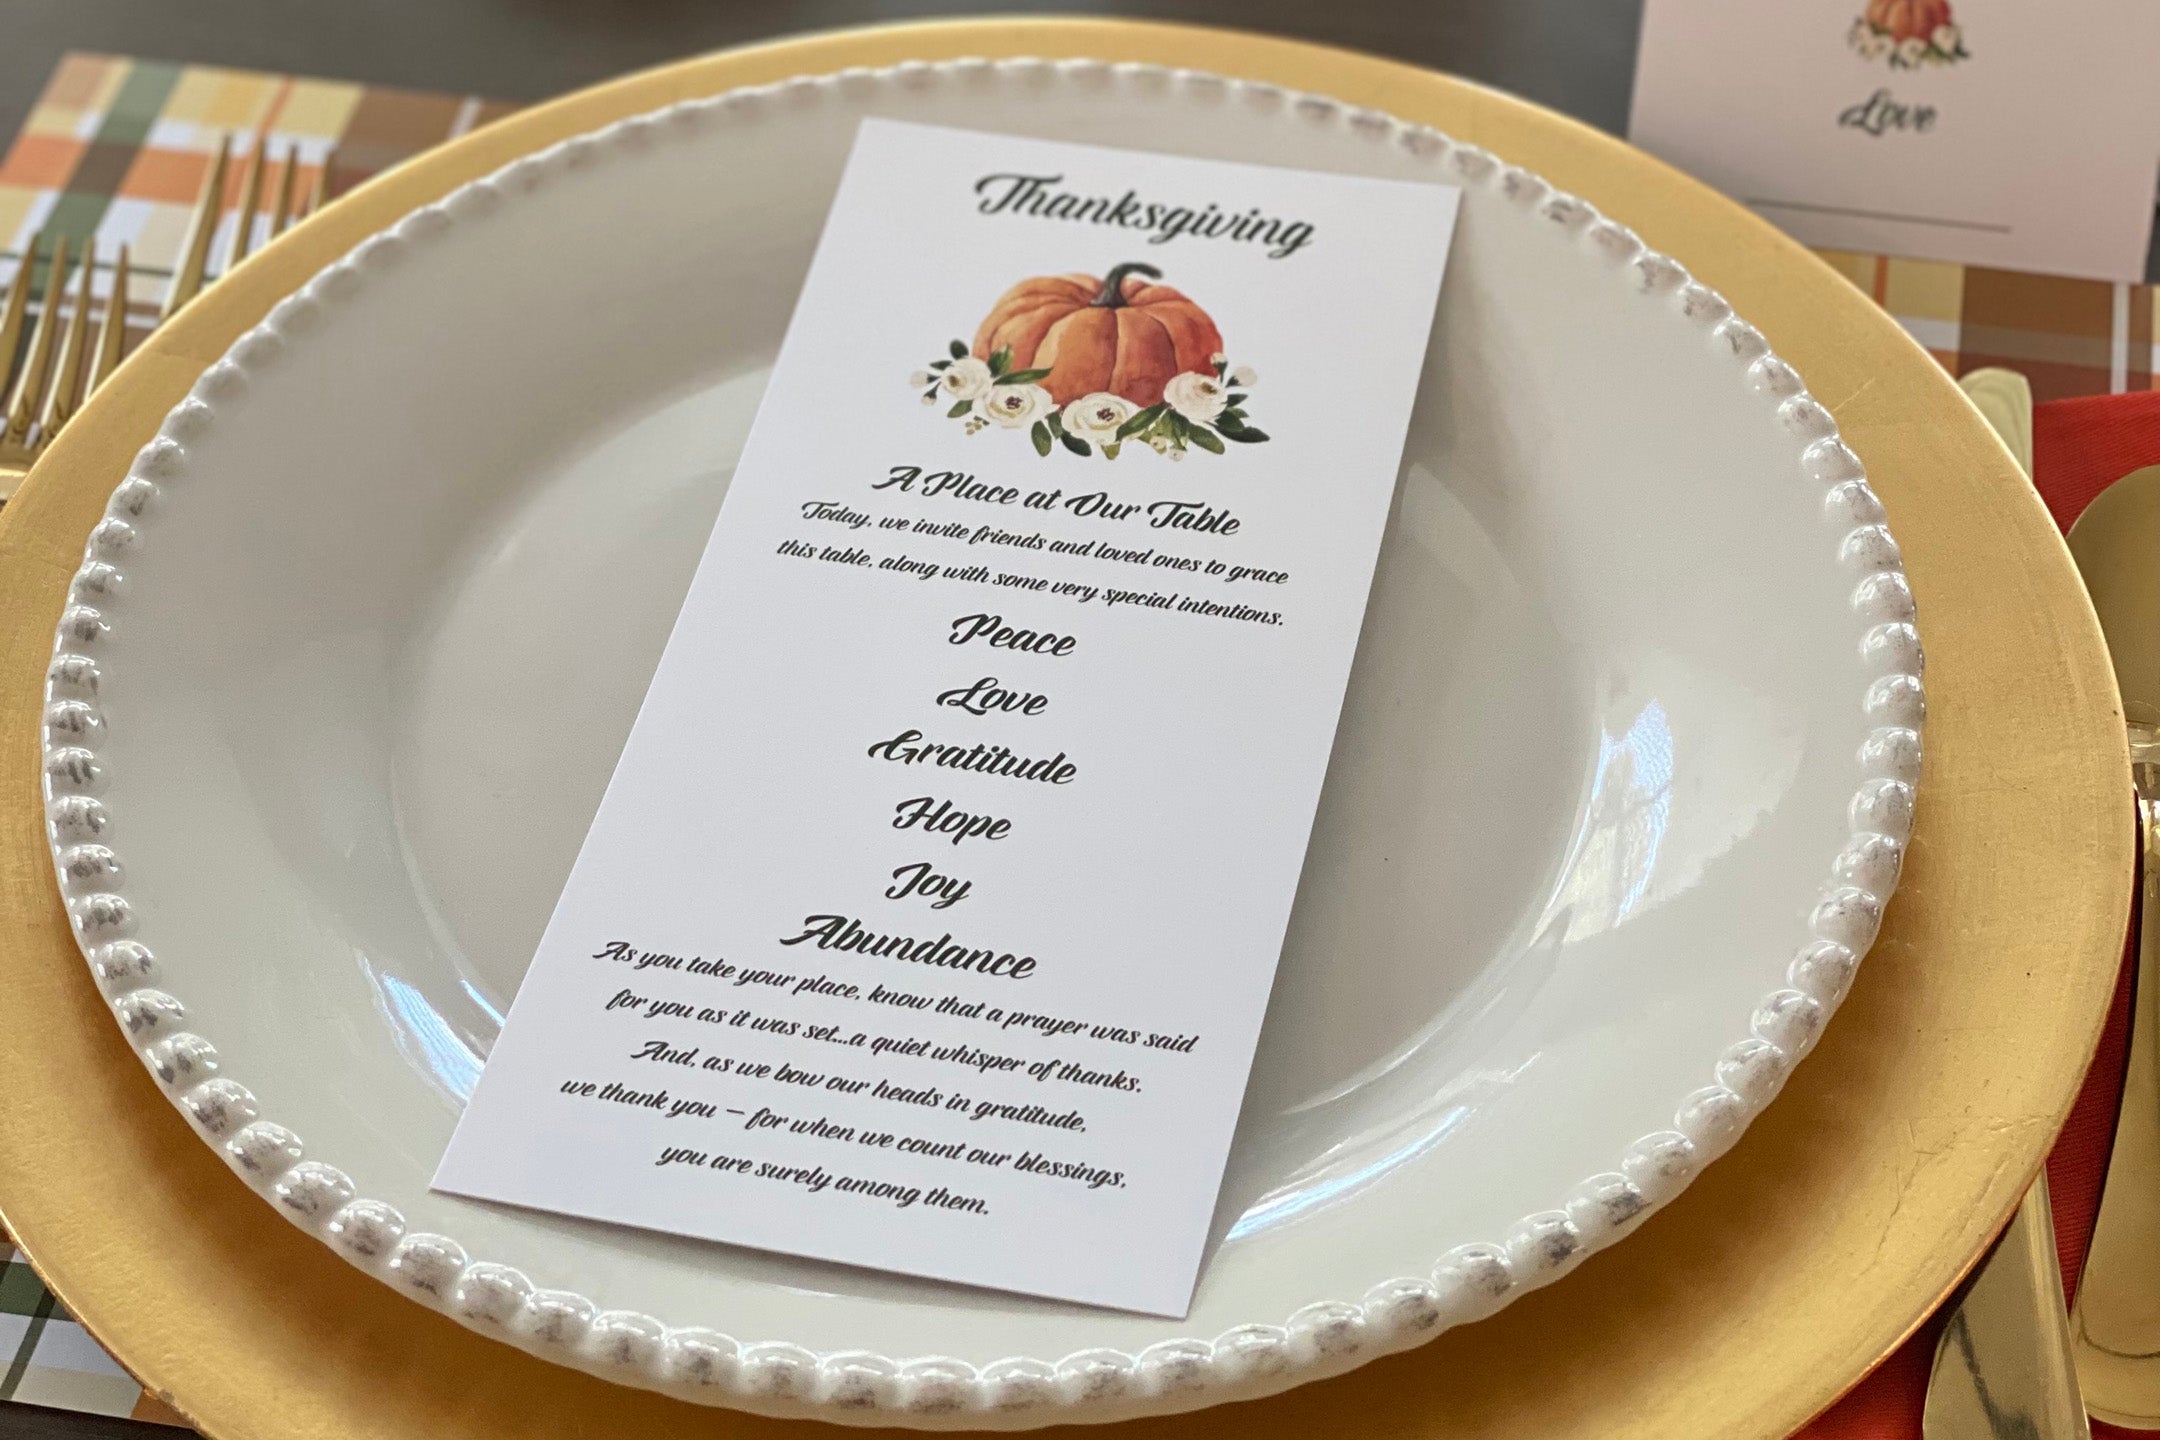 A Place At Our Table Cards - Thanksgiving - Set of 12 Cards